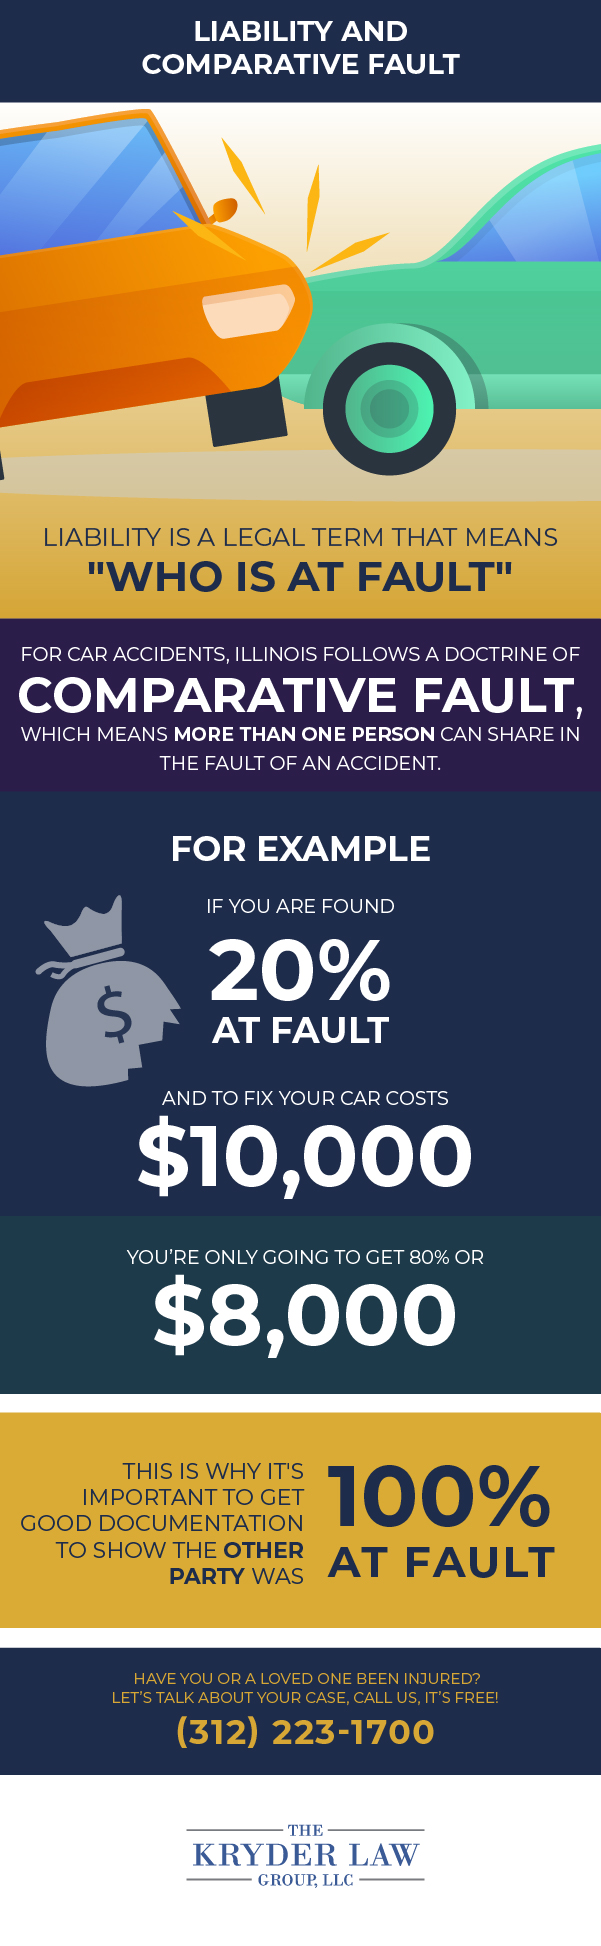 Liability and Comparative Fault Infographic